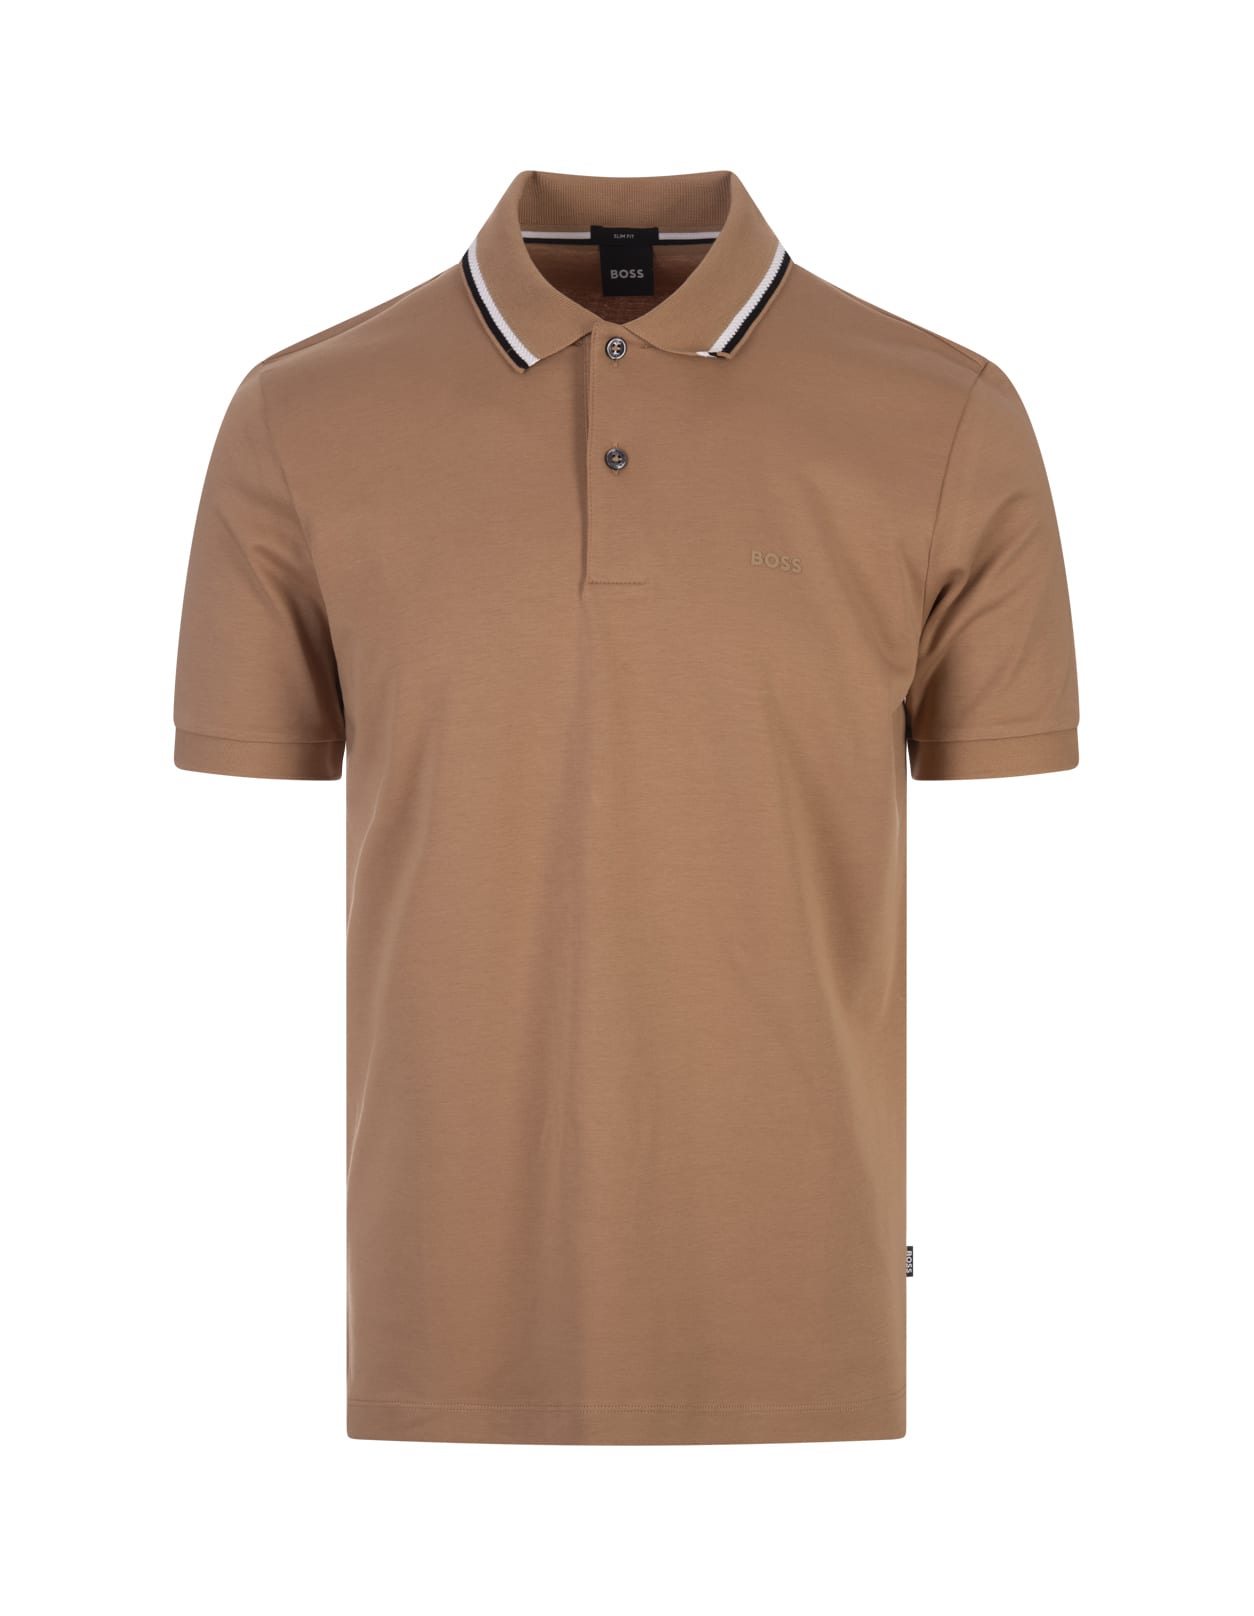 Beige Slim Fit Polo Shirt With Striped Collar